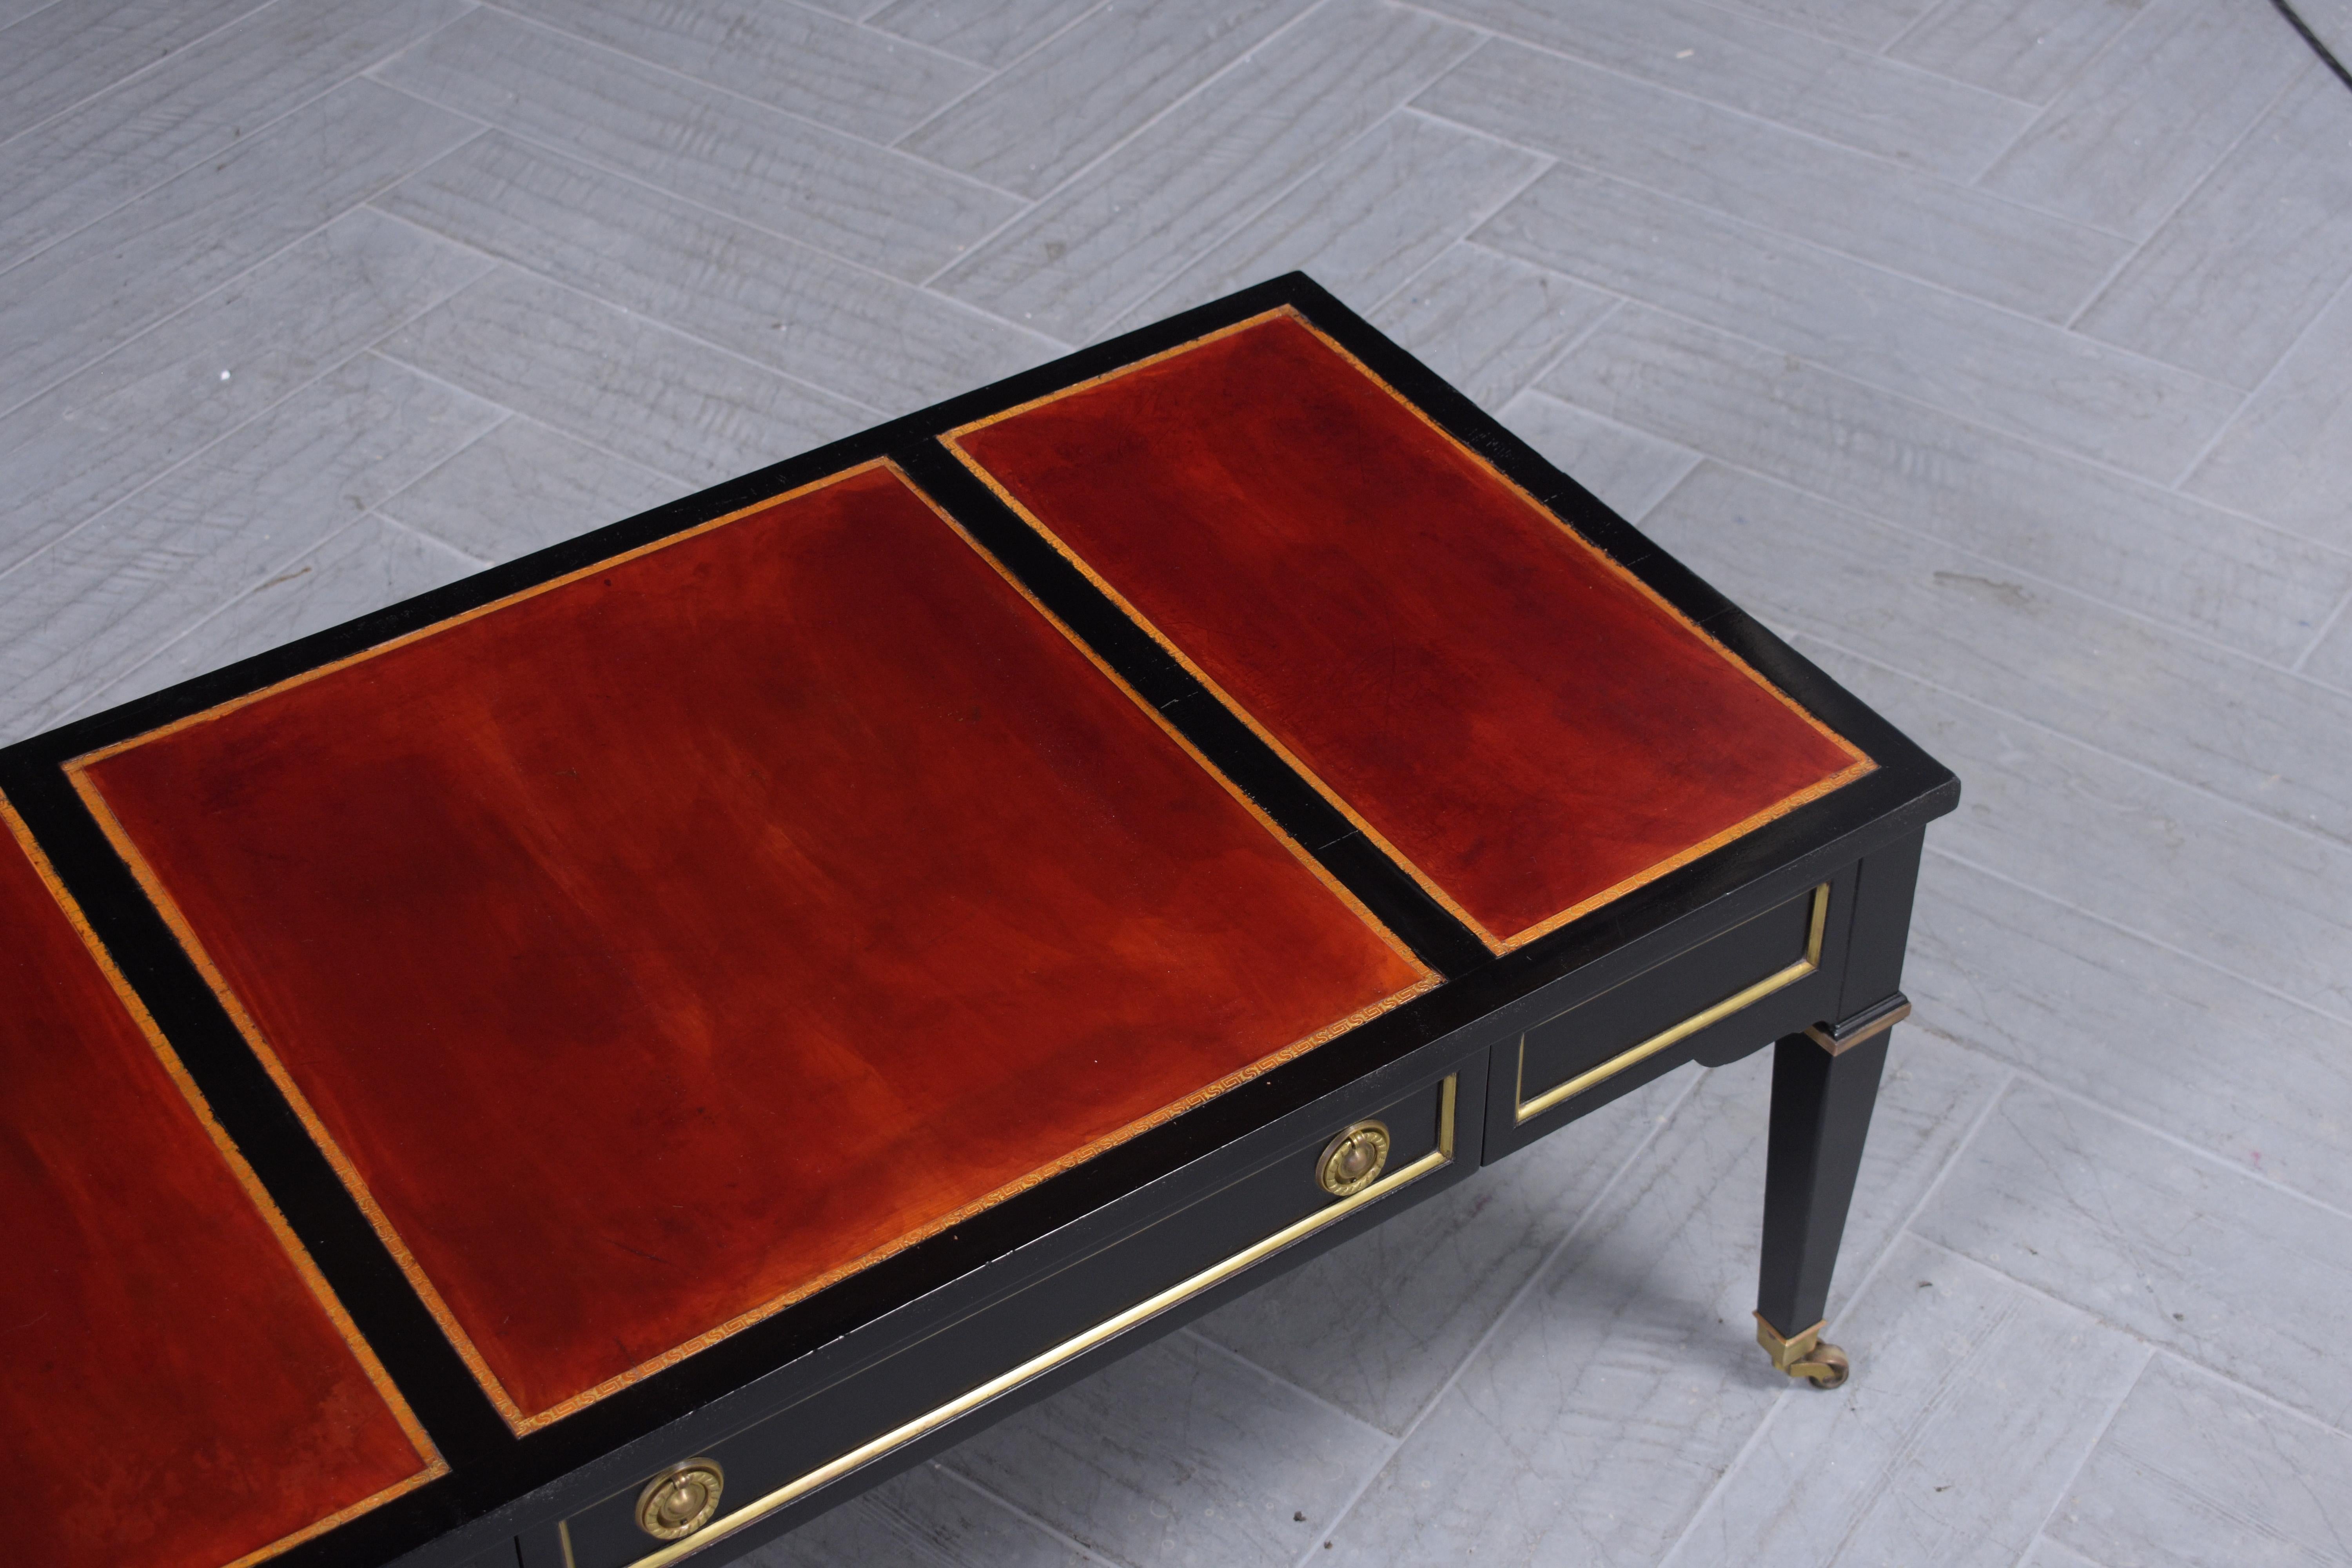 Hollywood Regency-Style Coffee Table by Heritage Henredon: 1960s Luxury For Sale 2